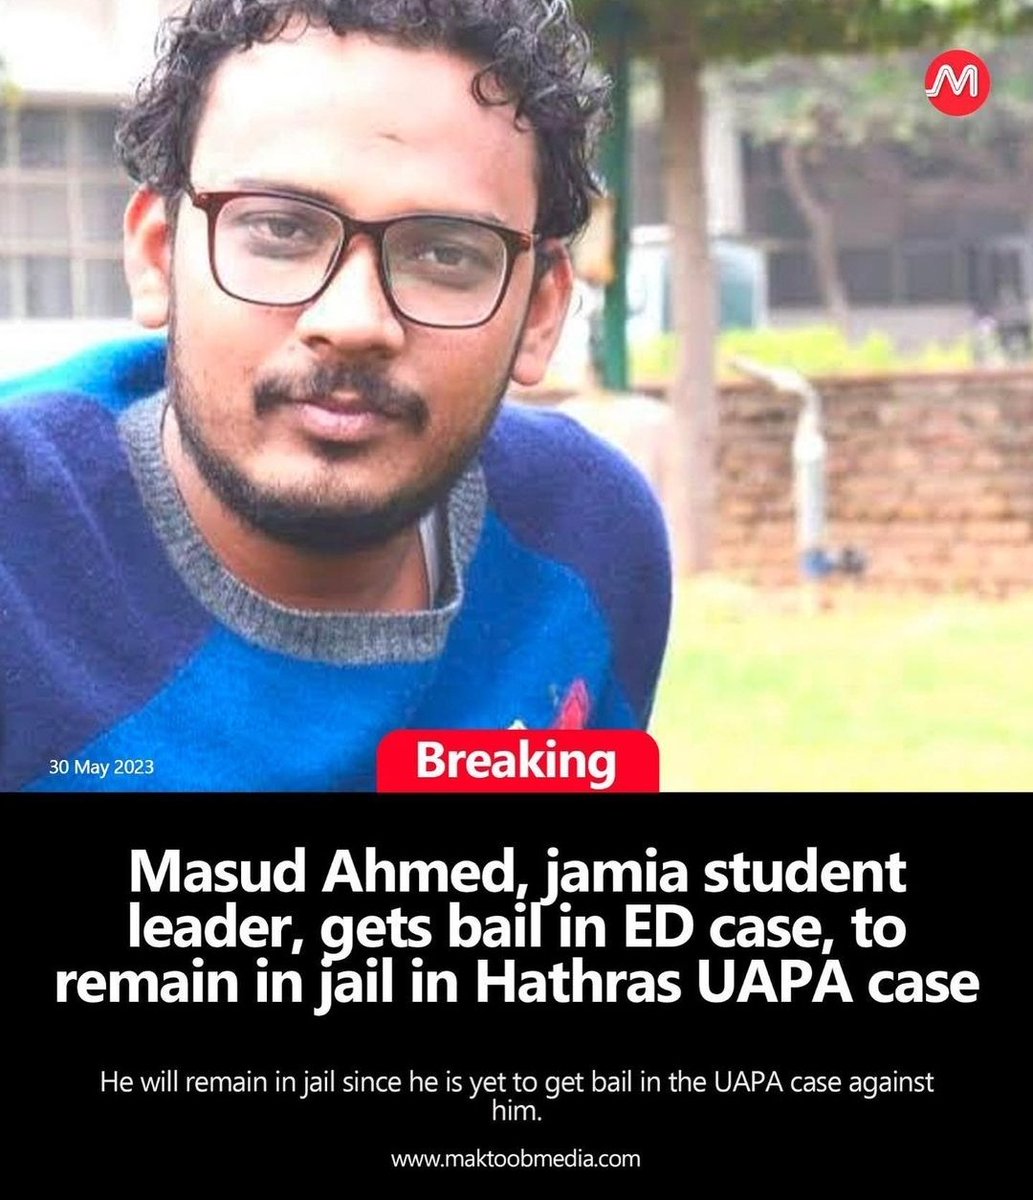 Masud Ahmed,who was arrested along with Siddique Kappan in Hathras case, has been granted bail in ED case.

He'll remain in jail because of UAPA.